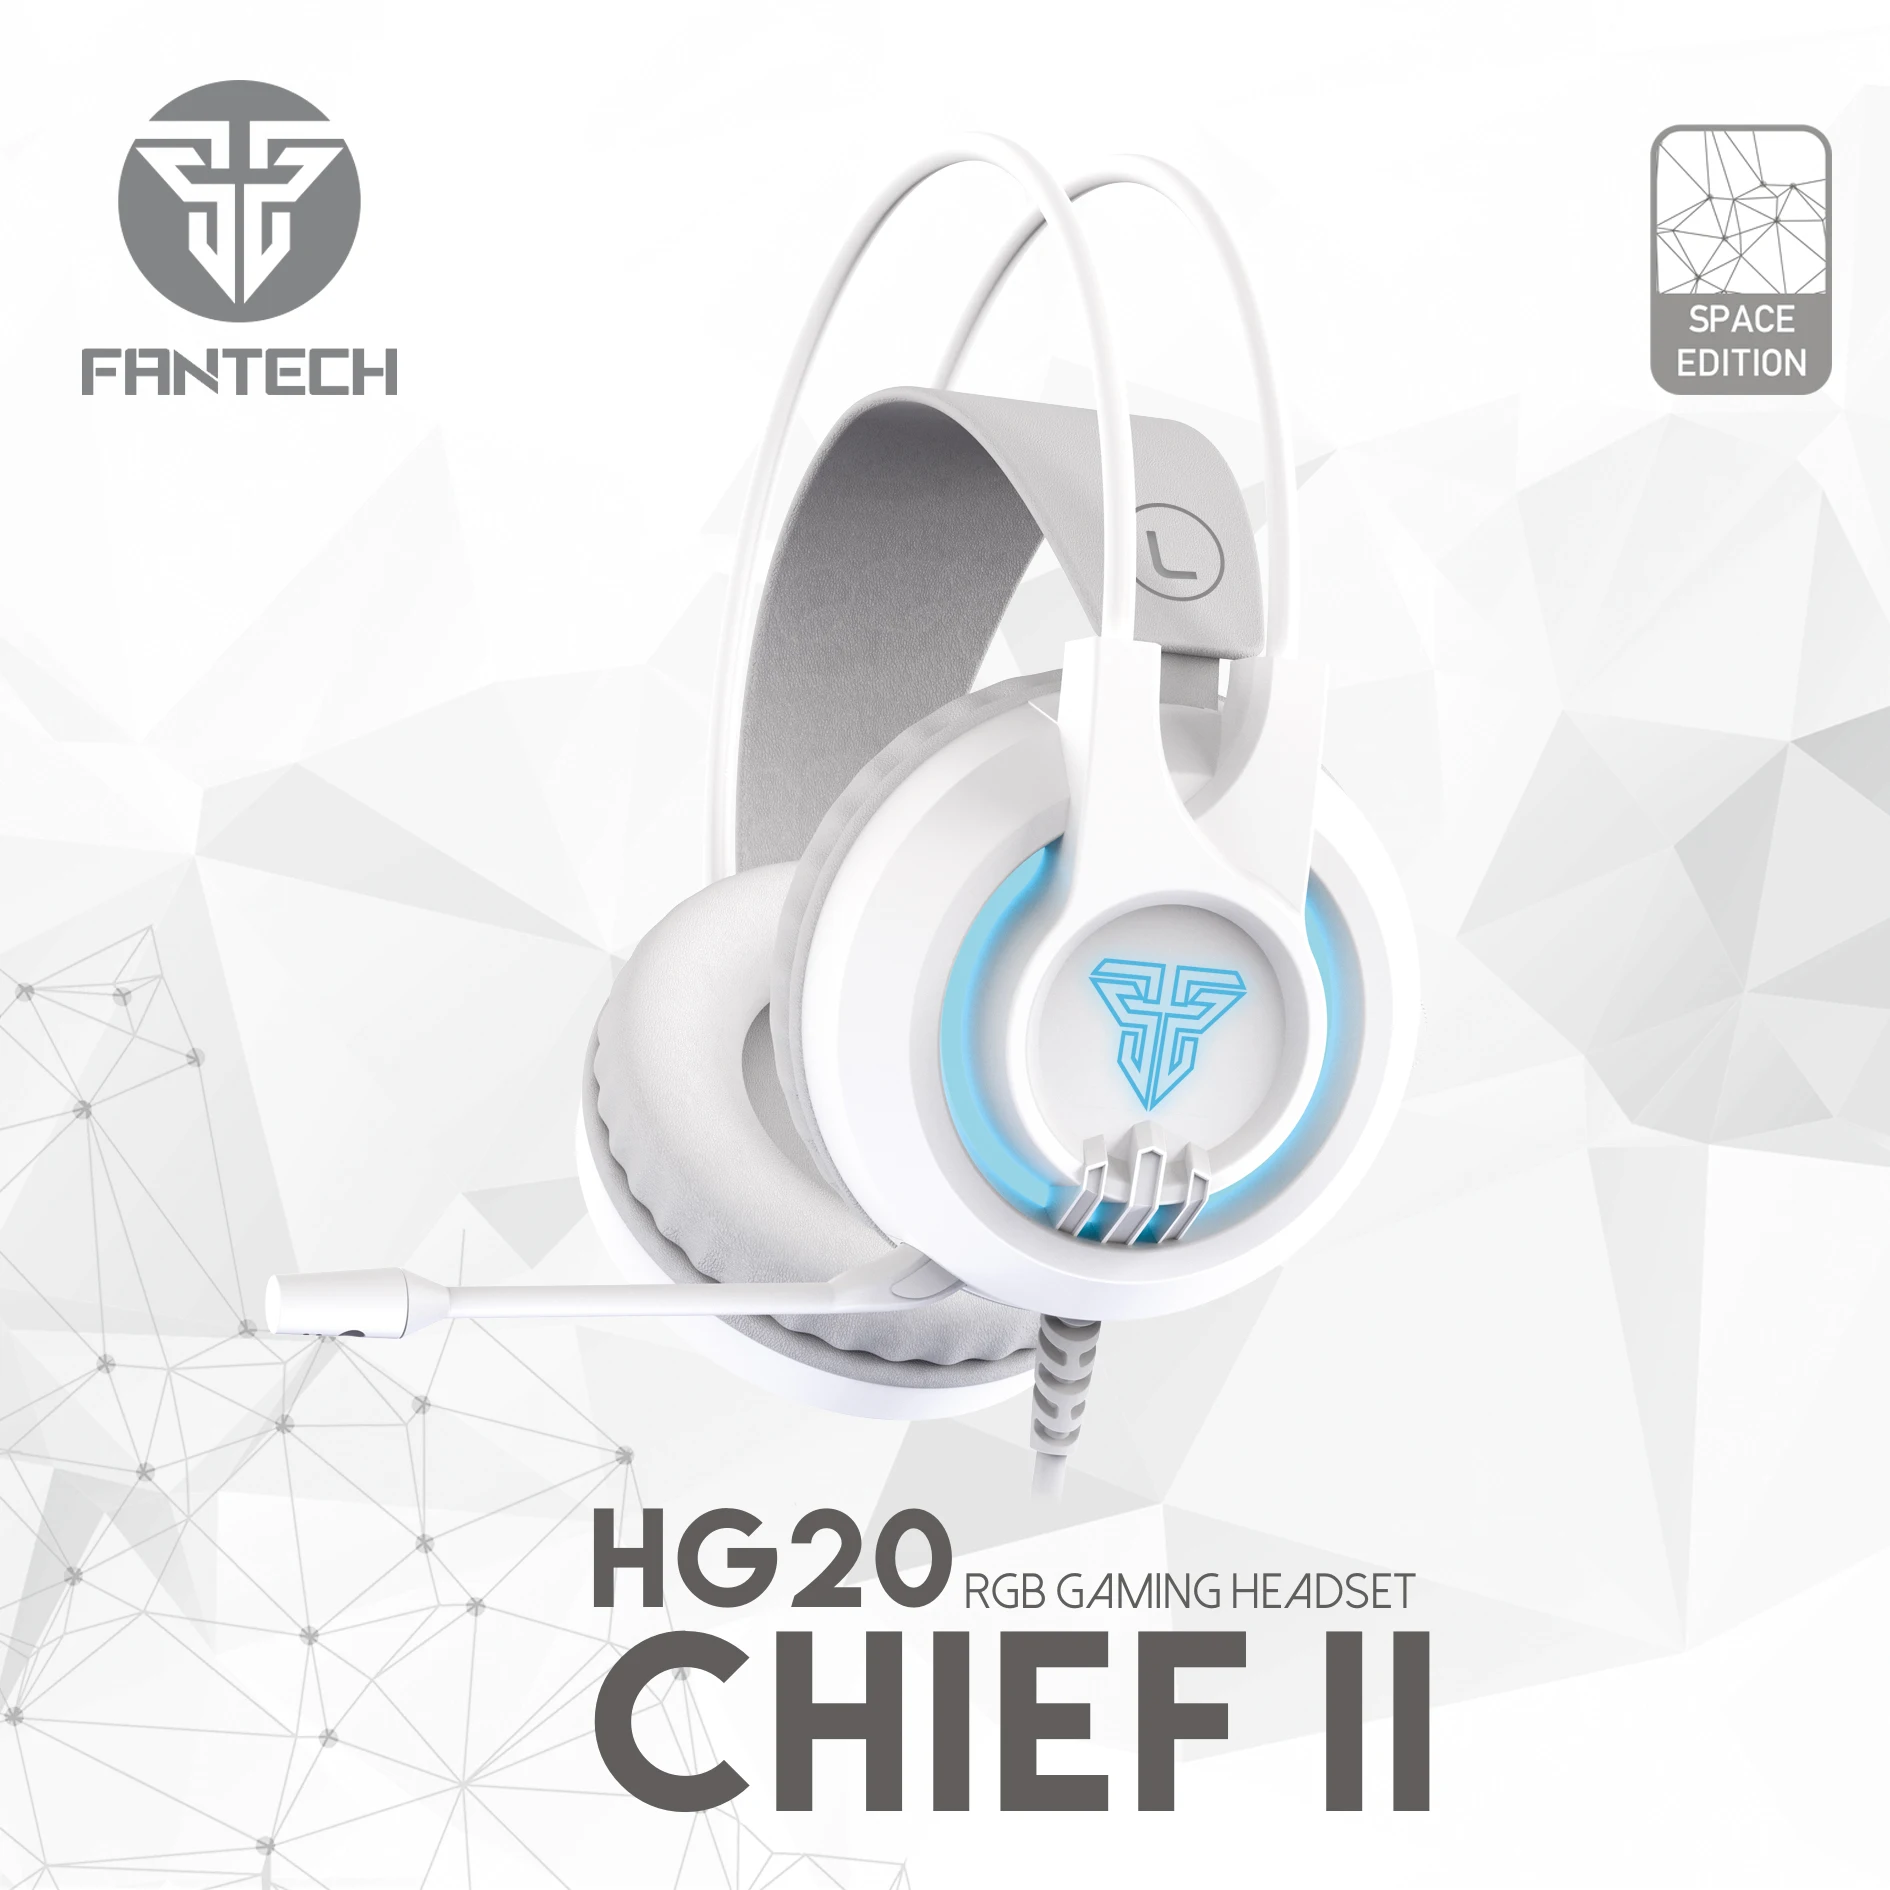 

FANTECH CHIEF II HG20 Gaming Headset Memory Ear Muffs and Noise Cancelling Microphone RGB Headphone with Mic for CSGO Gamer